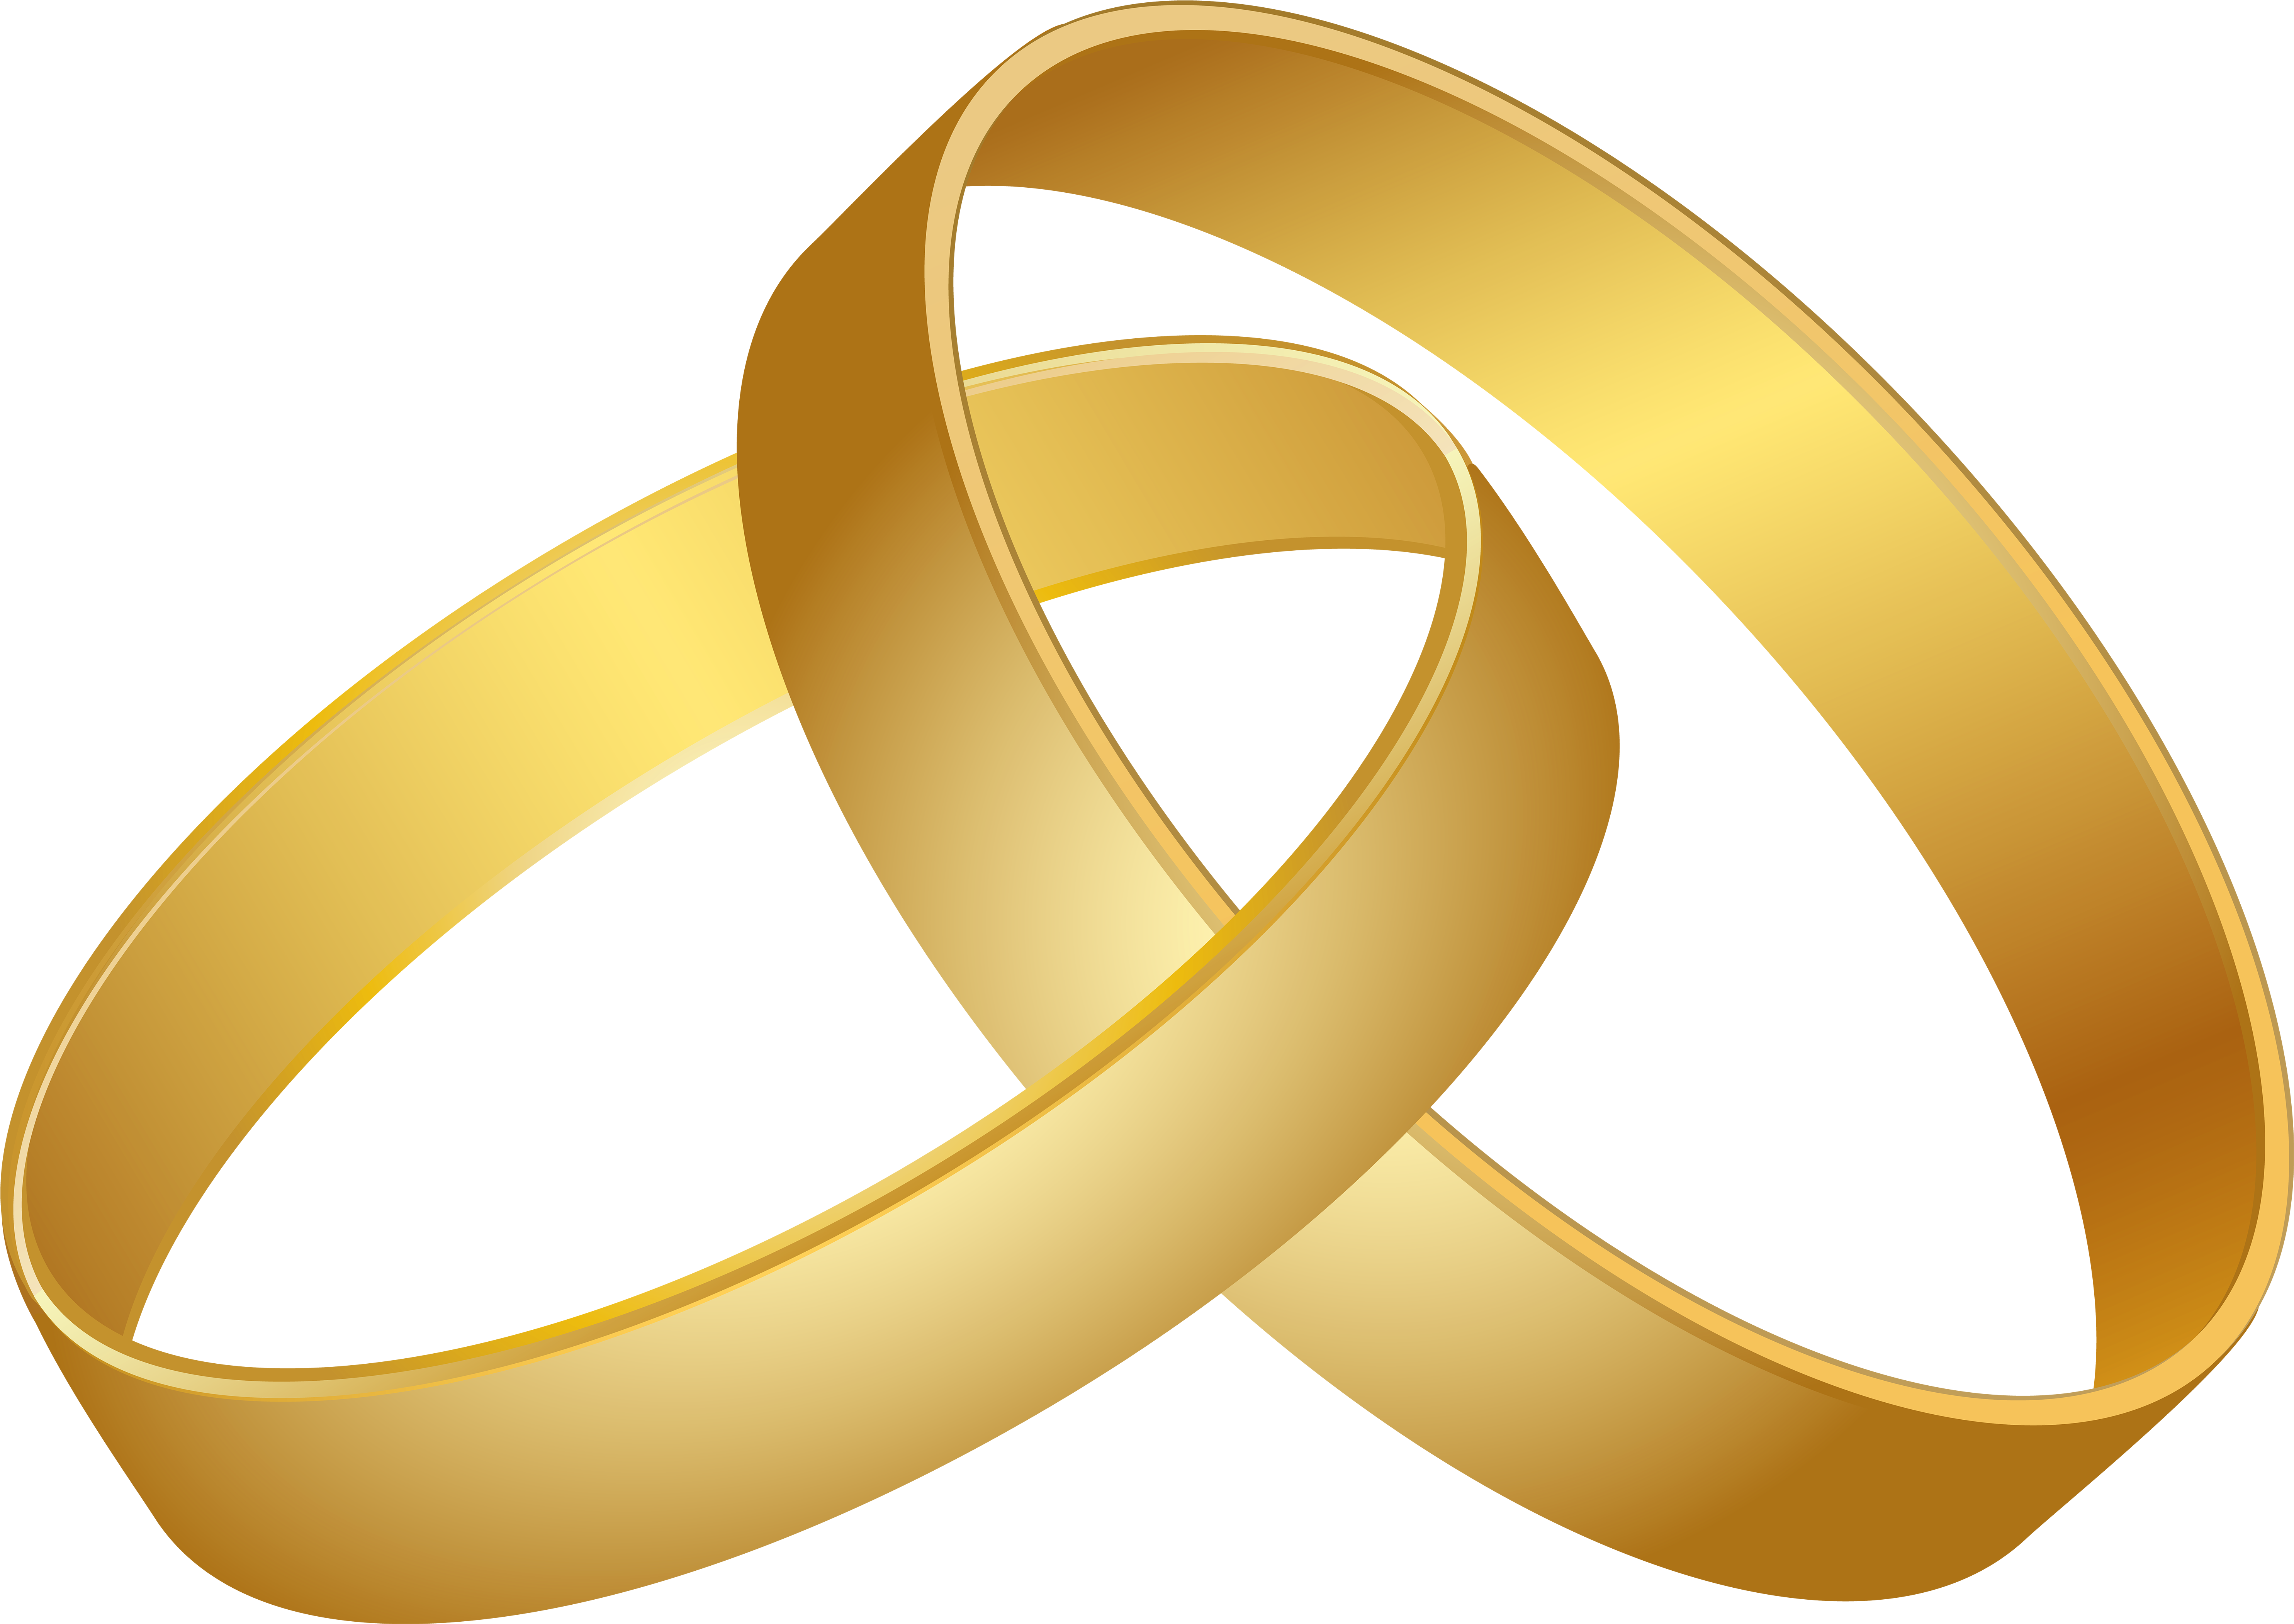 A Gold Rings Intertwined Together